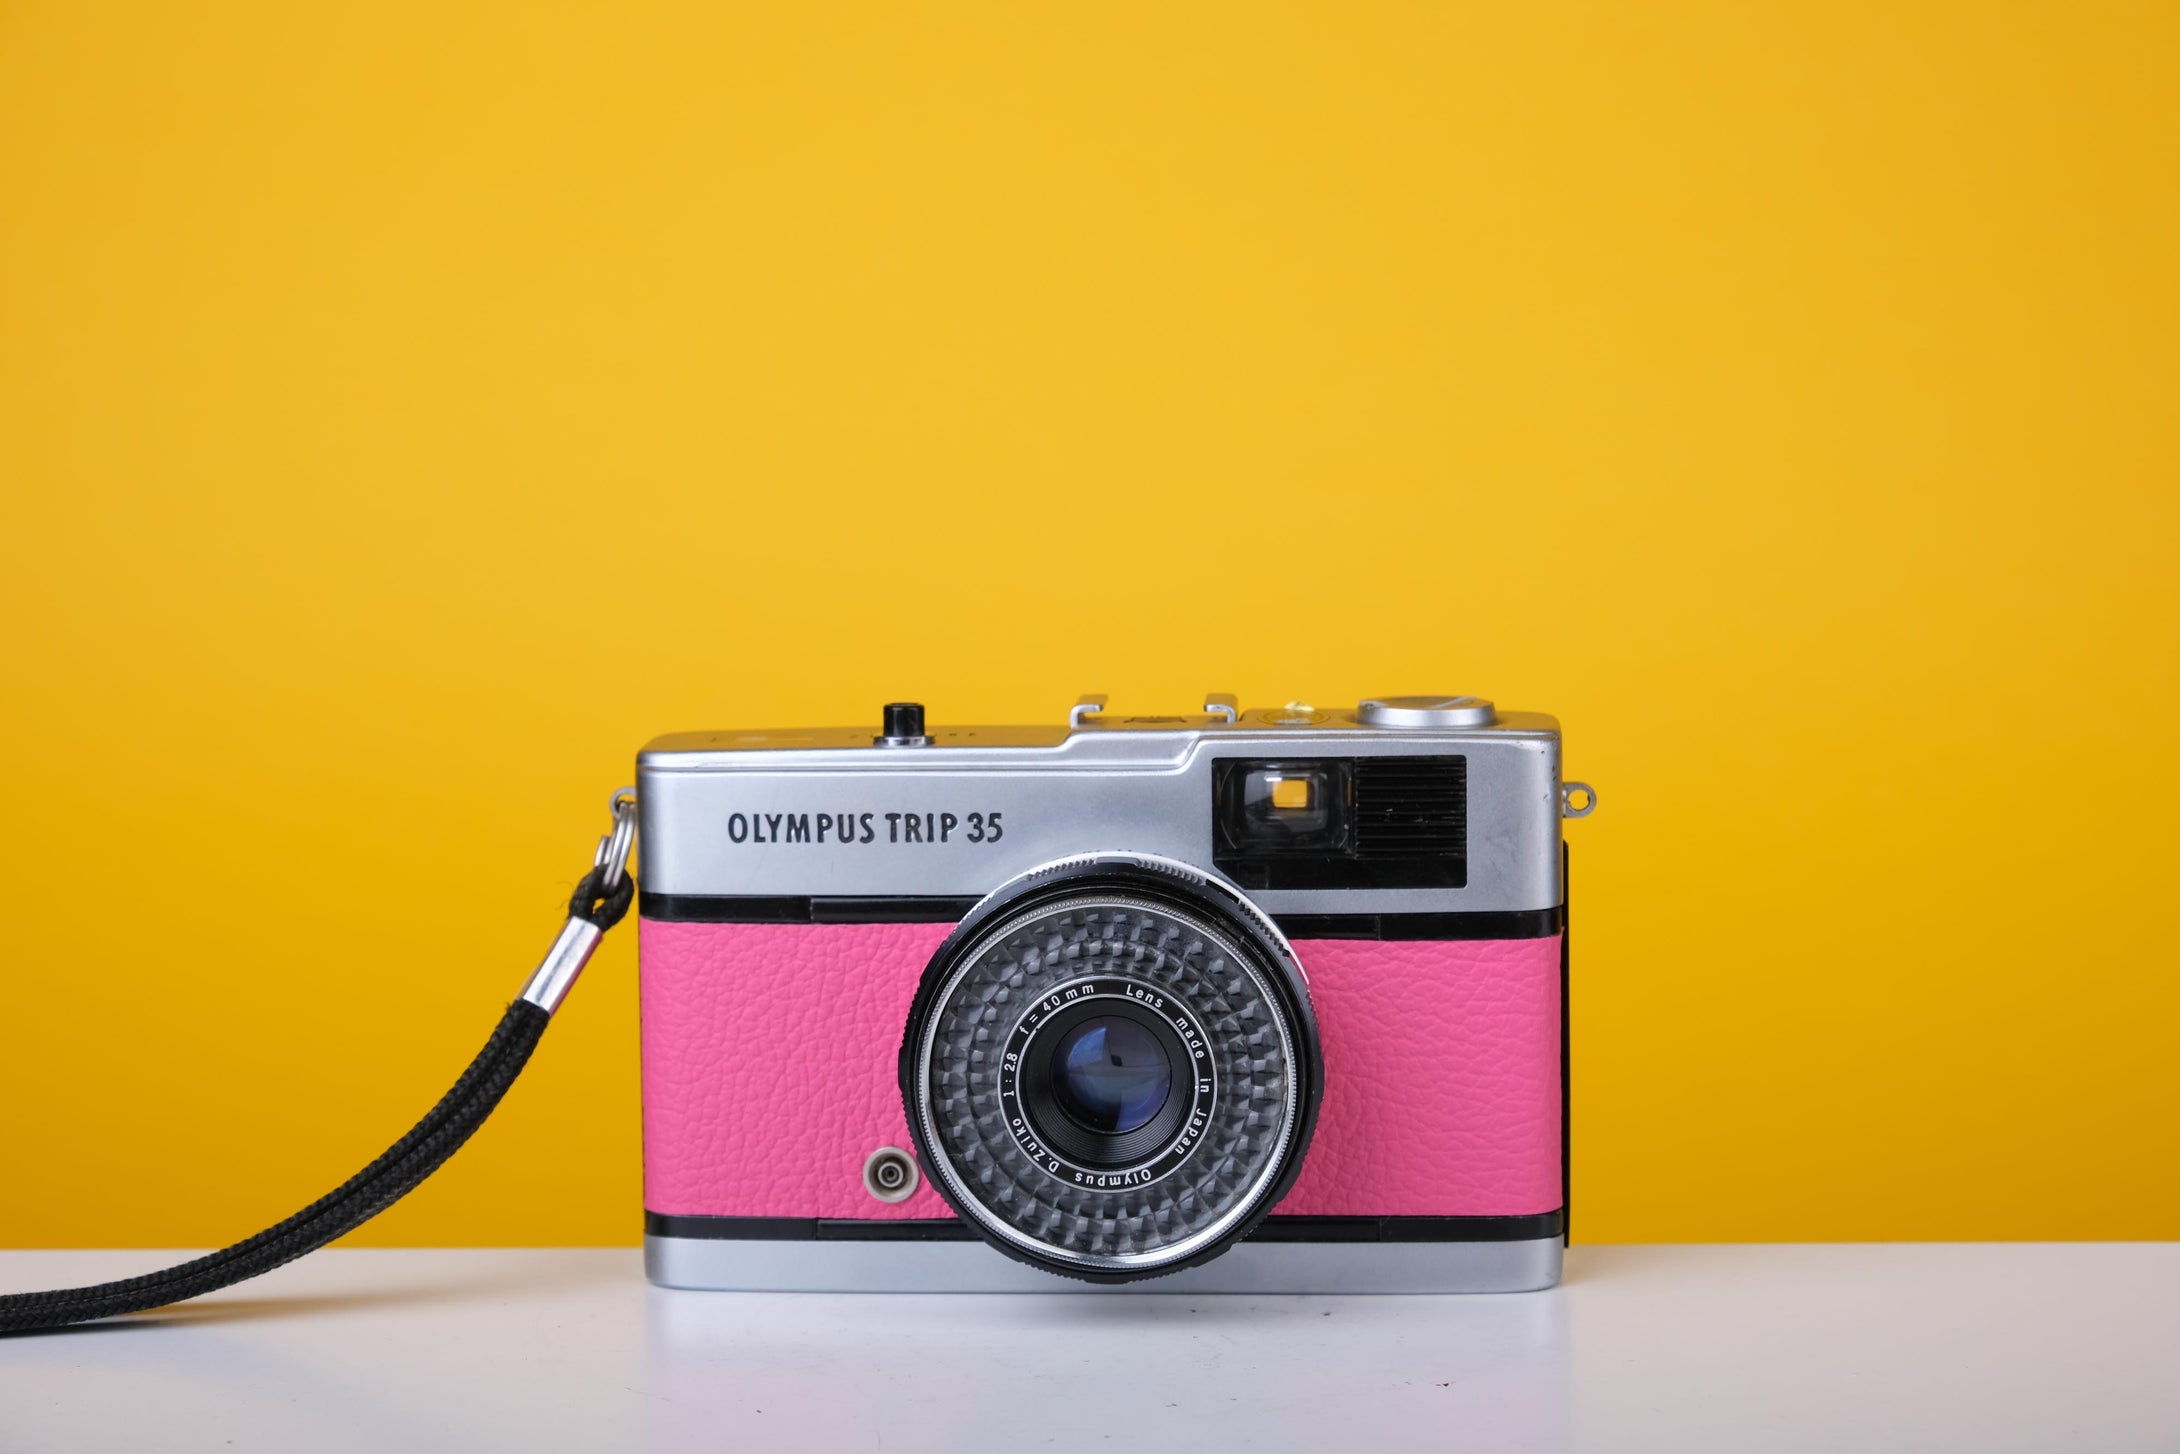 Olympus Trip 35 Vintage 35mm Film Camera with Zuiko 40mm f2.8 Lens with Customised Pink Skin